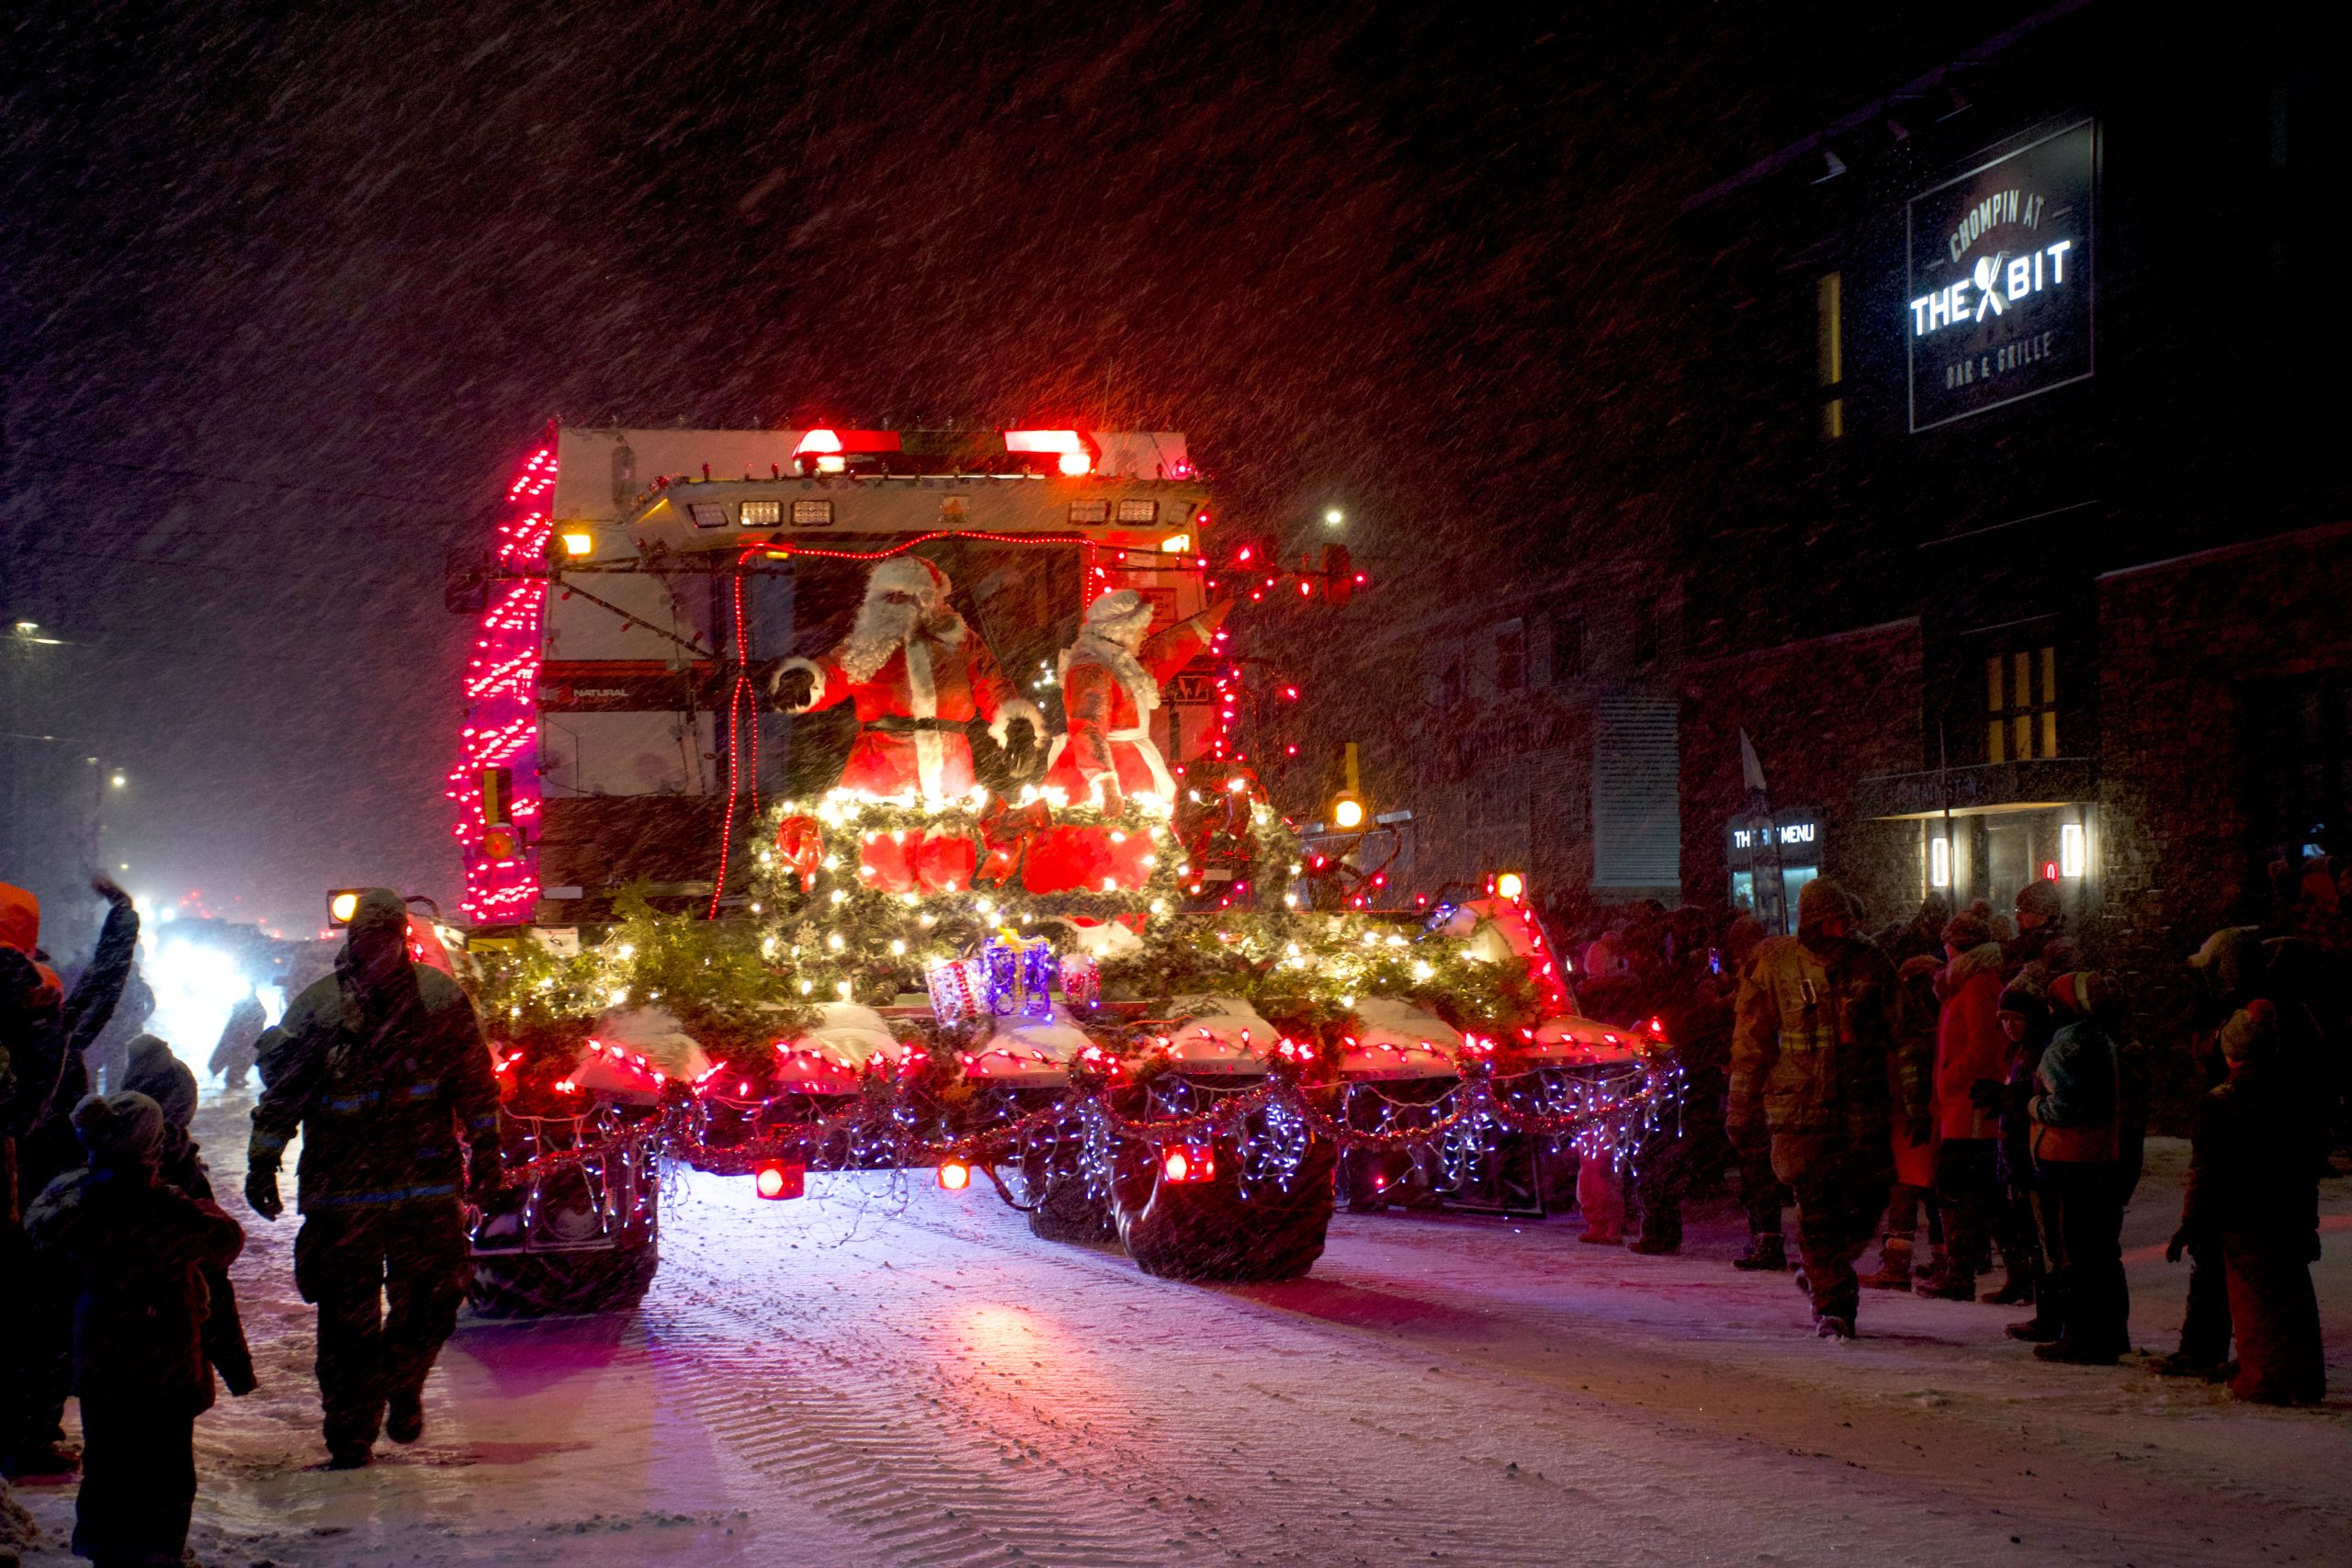 Farmers’ parade lights up streets of Rockwood